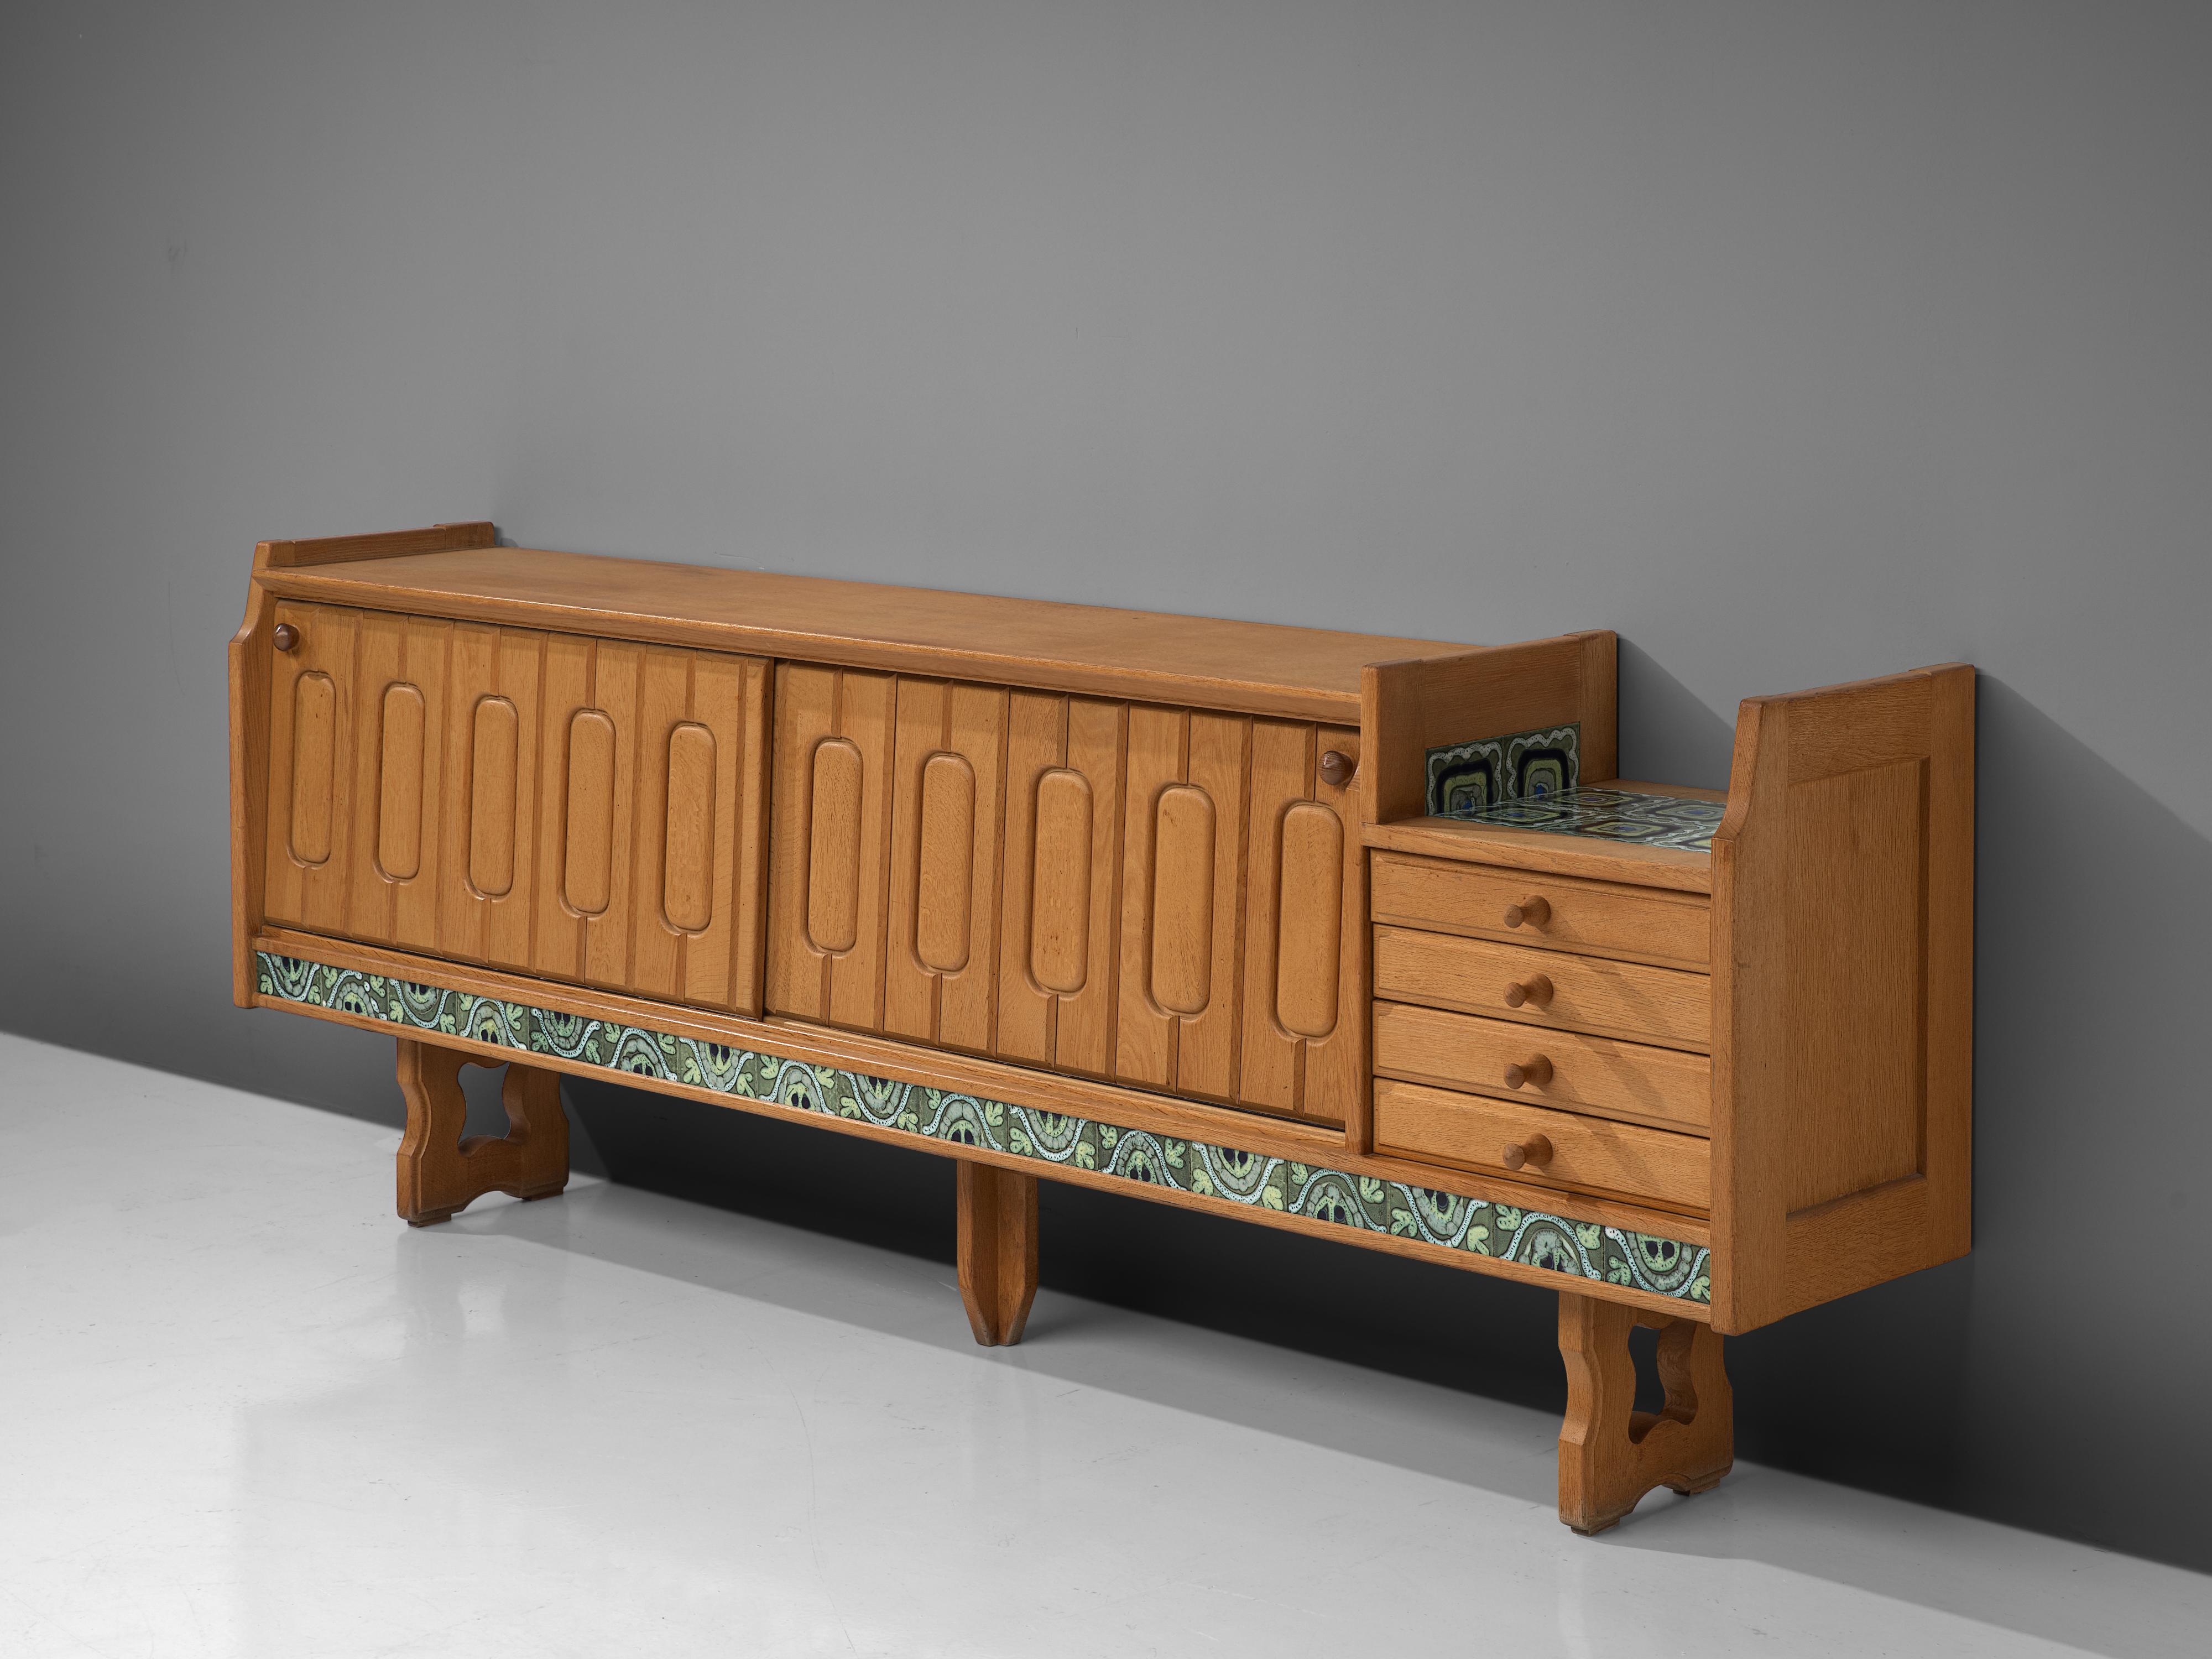 Guillerme et Chambron, sideboard model 'Simon', oak, ceramic, France, 1960s

Credenza in oak by French designers Guillerme et Chambron. This sideboard is equipped with two sliding doors and a set of drawers. The front of the sideboard is